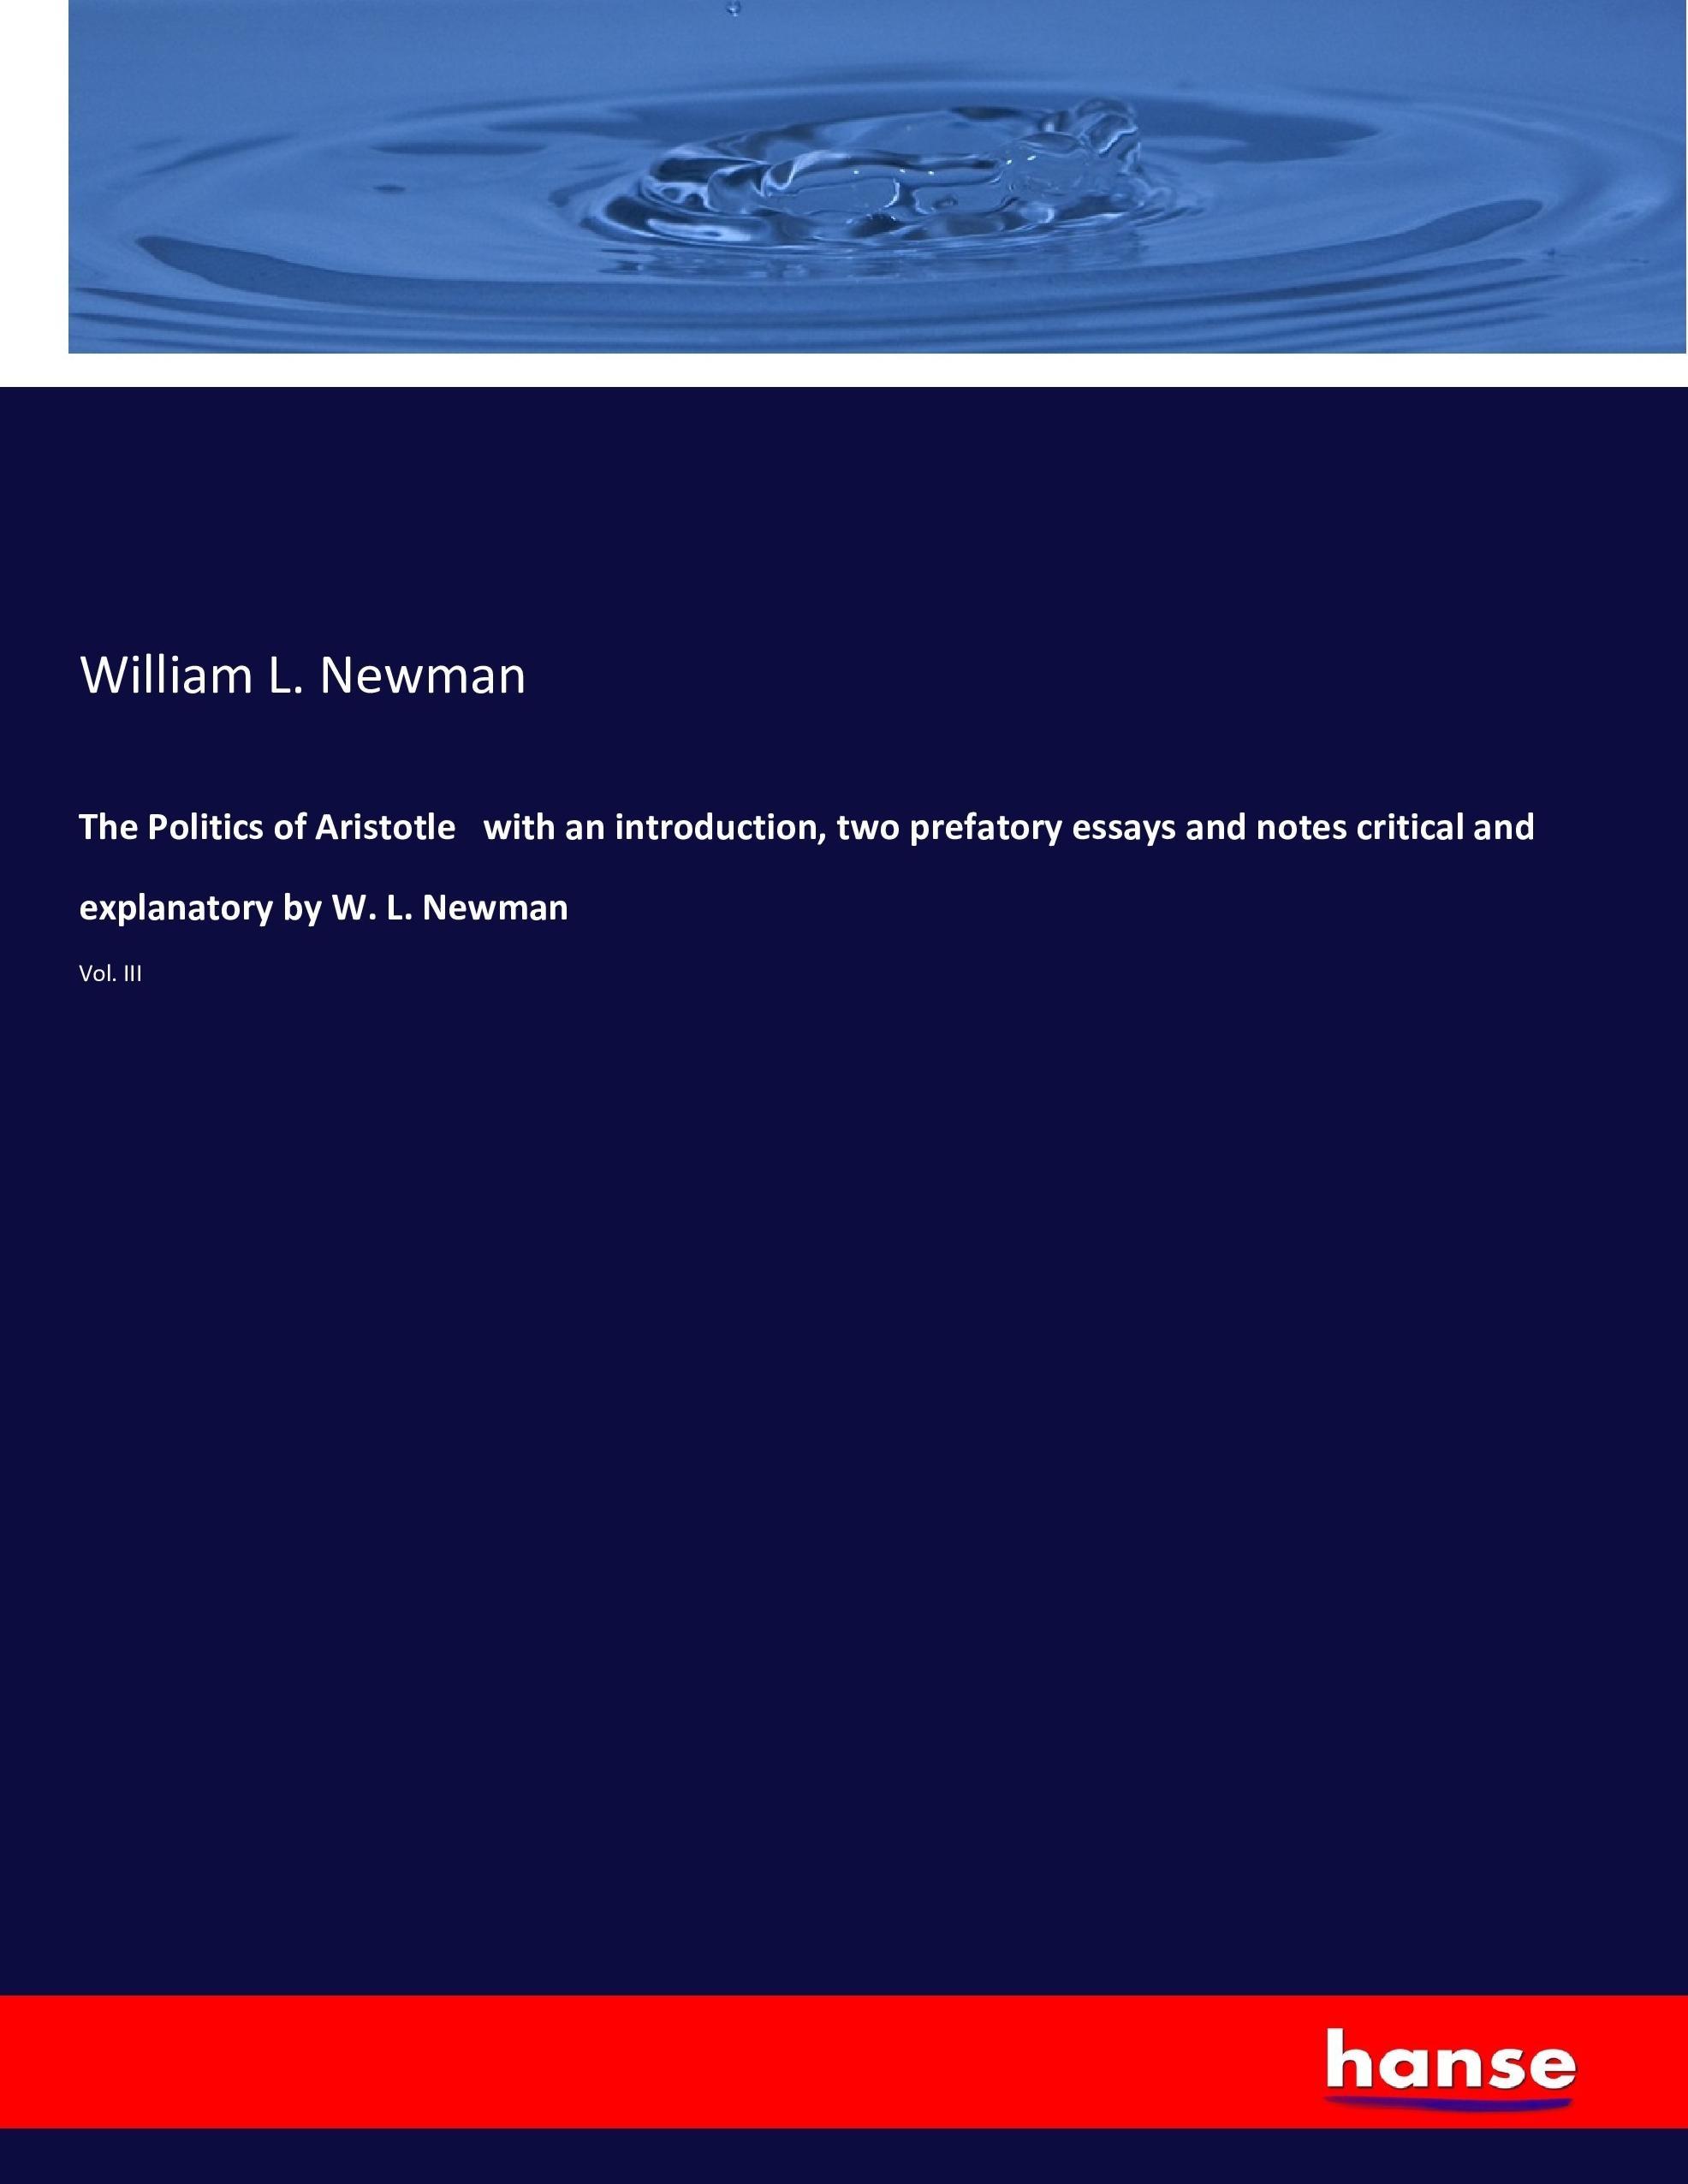 The Politics of Aristotle with an introduction, two prefatory essays and notes critical and explanatory by W. L. Newman - Newman, William L.